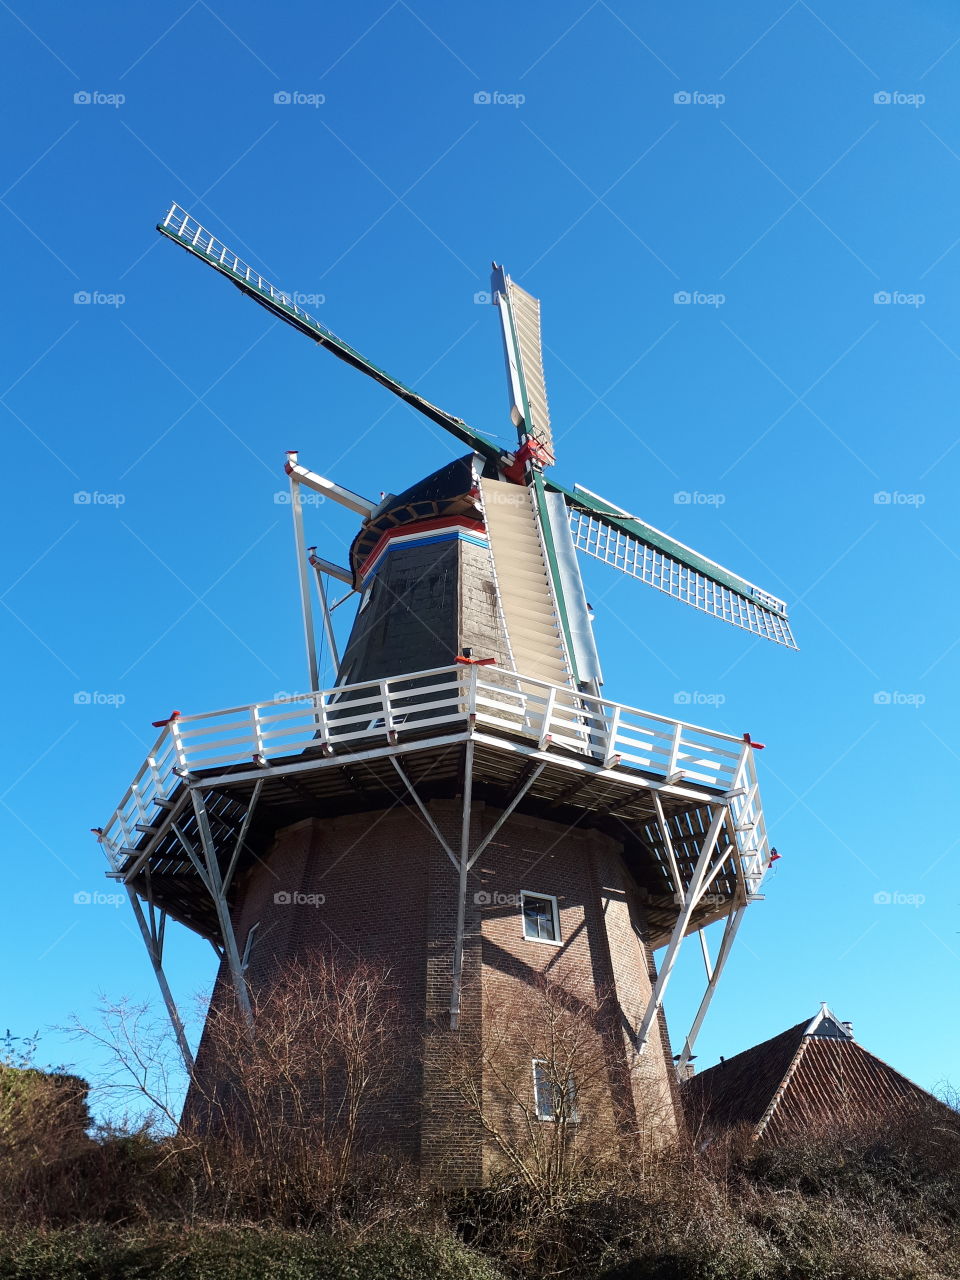 windmill in the Netherlands